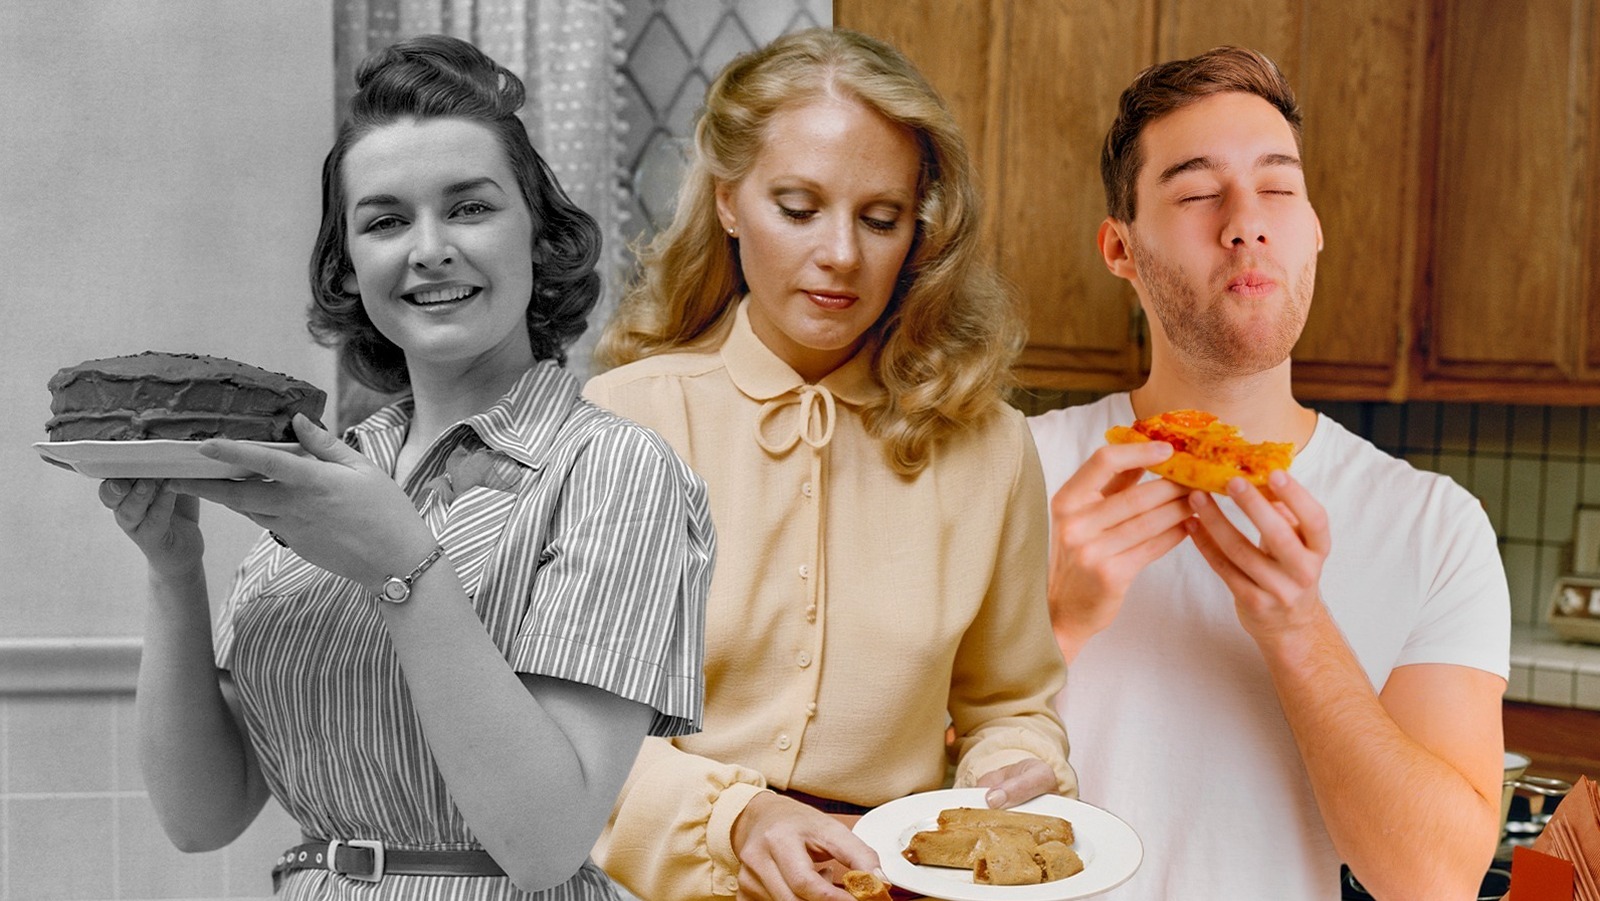 Top Food Trends For Every Decade Of The Last 100 Years